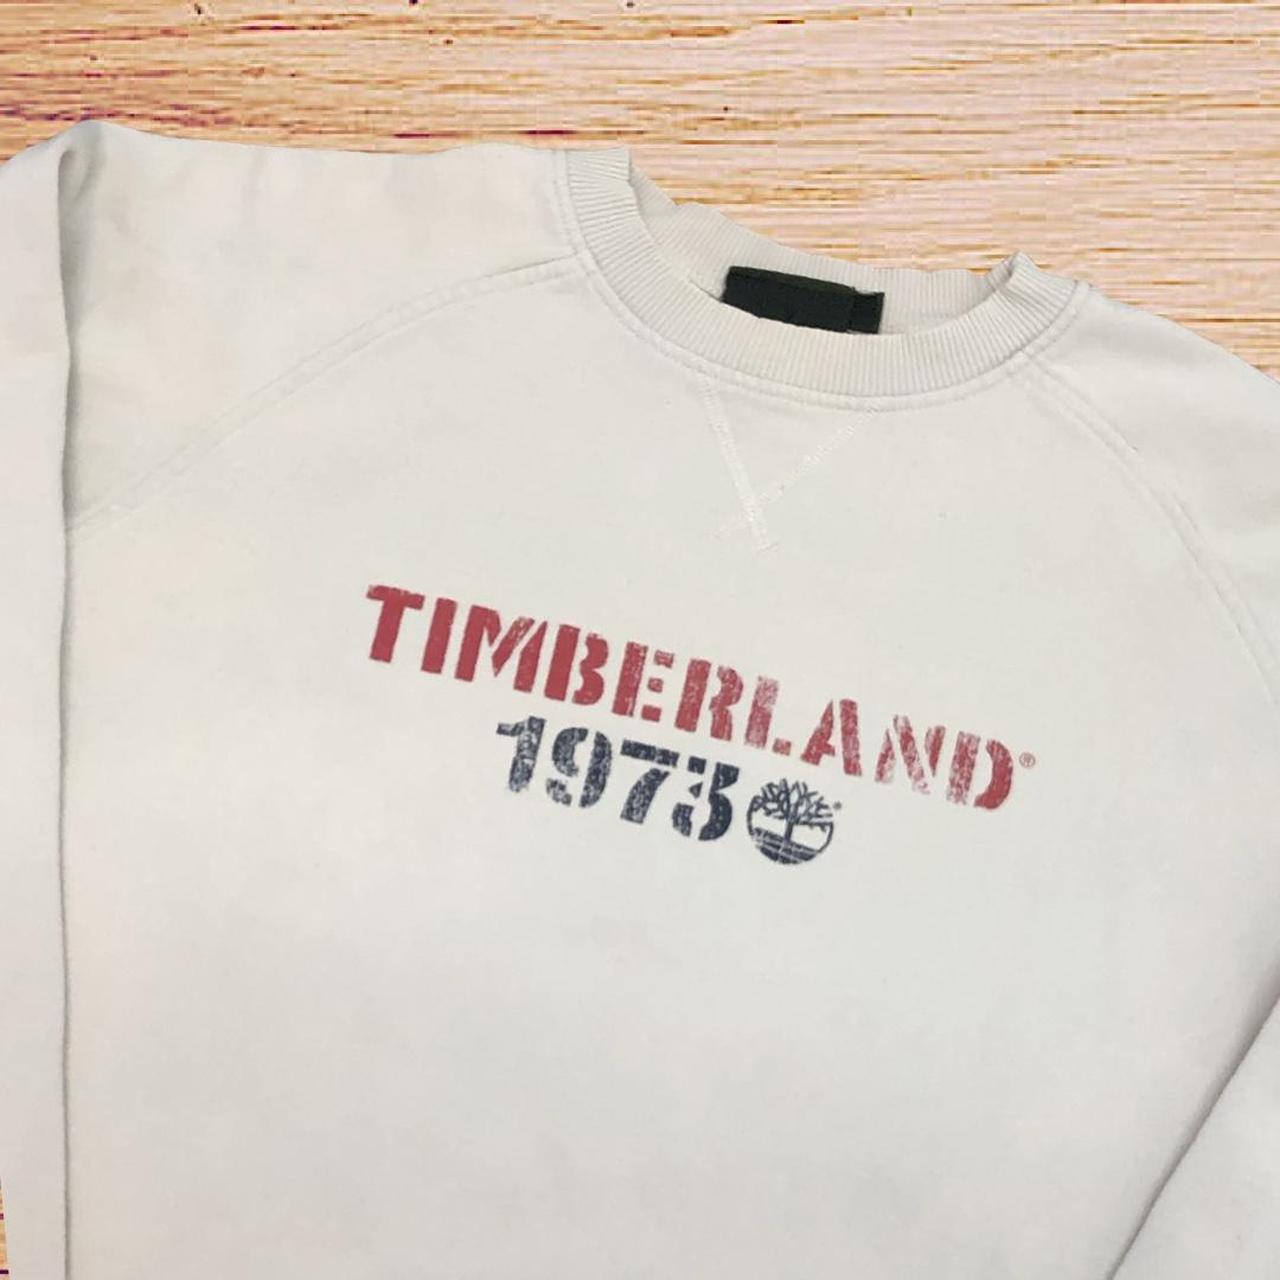 Product Image 1 - Timberland crewneck!

Measurements:
Length- 29”
Width (Pit to